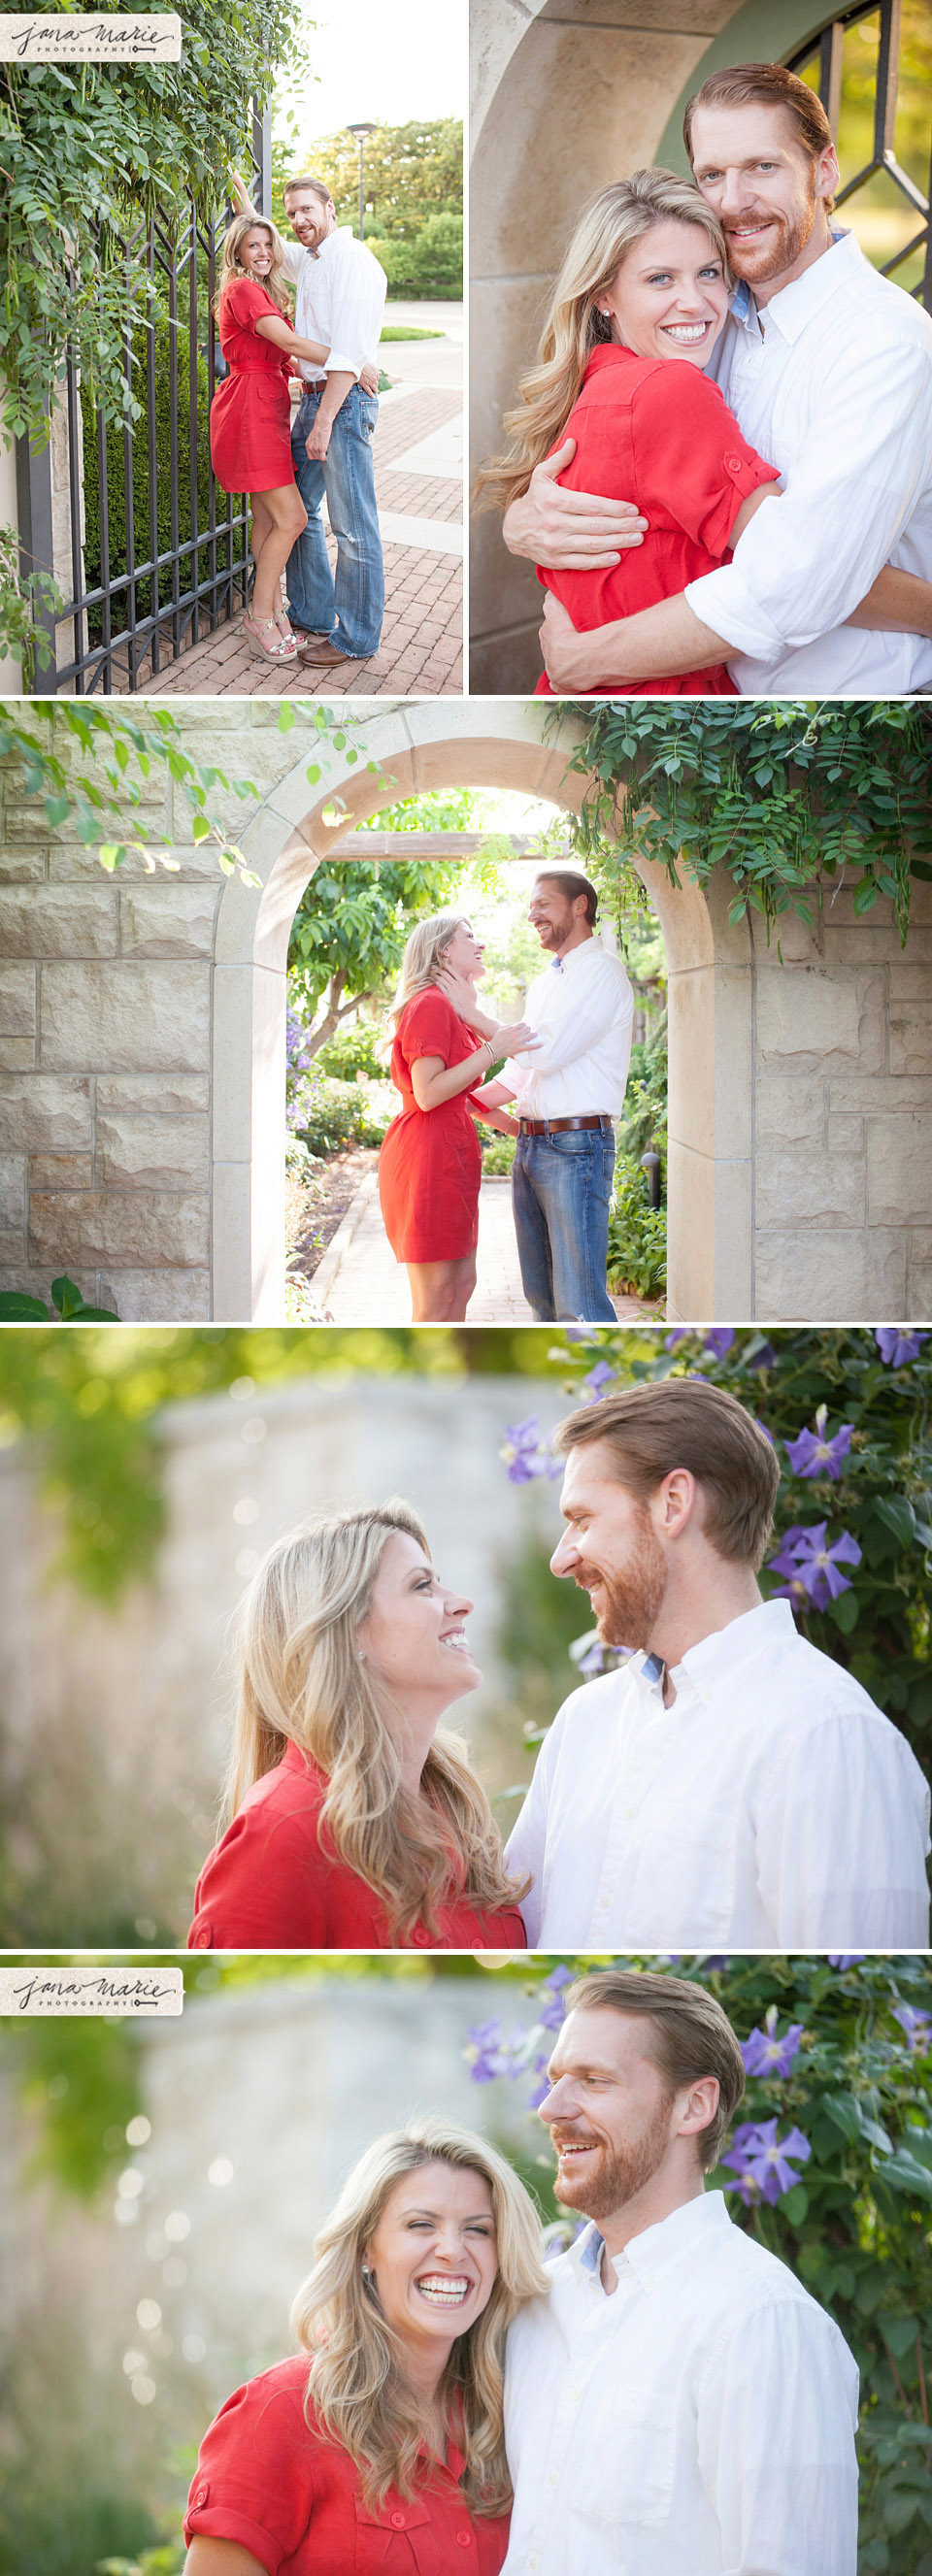 Silly, fun, garden, Arches, photography, Jana Marler, getting married, Bride and groom